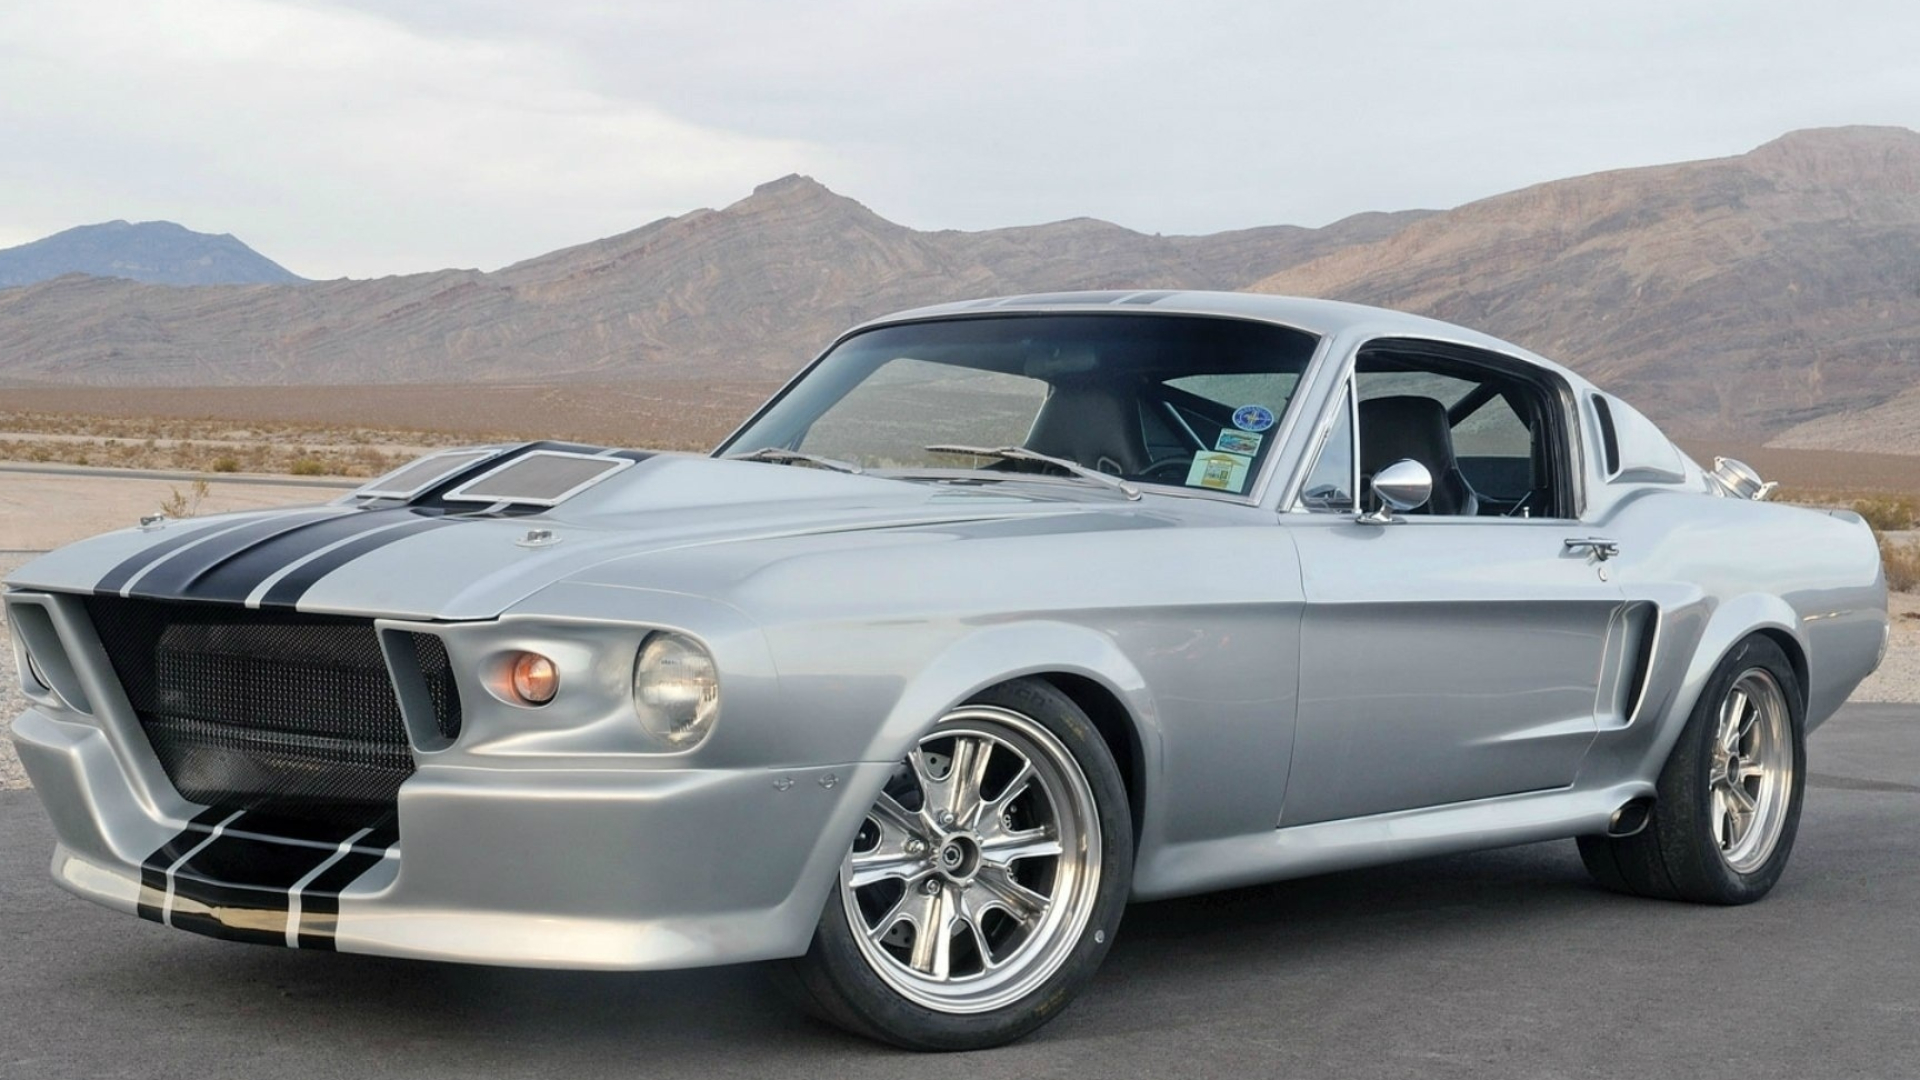 Ford Mustang: The car known as 'Eleanor', Starred with Nicolas Cage and Angelina Jolie, Gone in 60 Seconds movie. 1920x1080 Full HD Wallpaper.